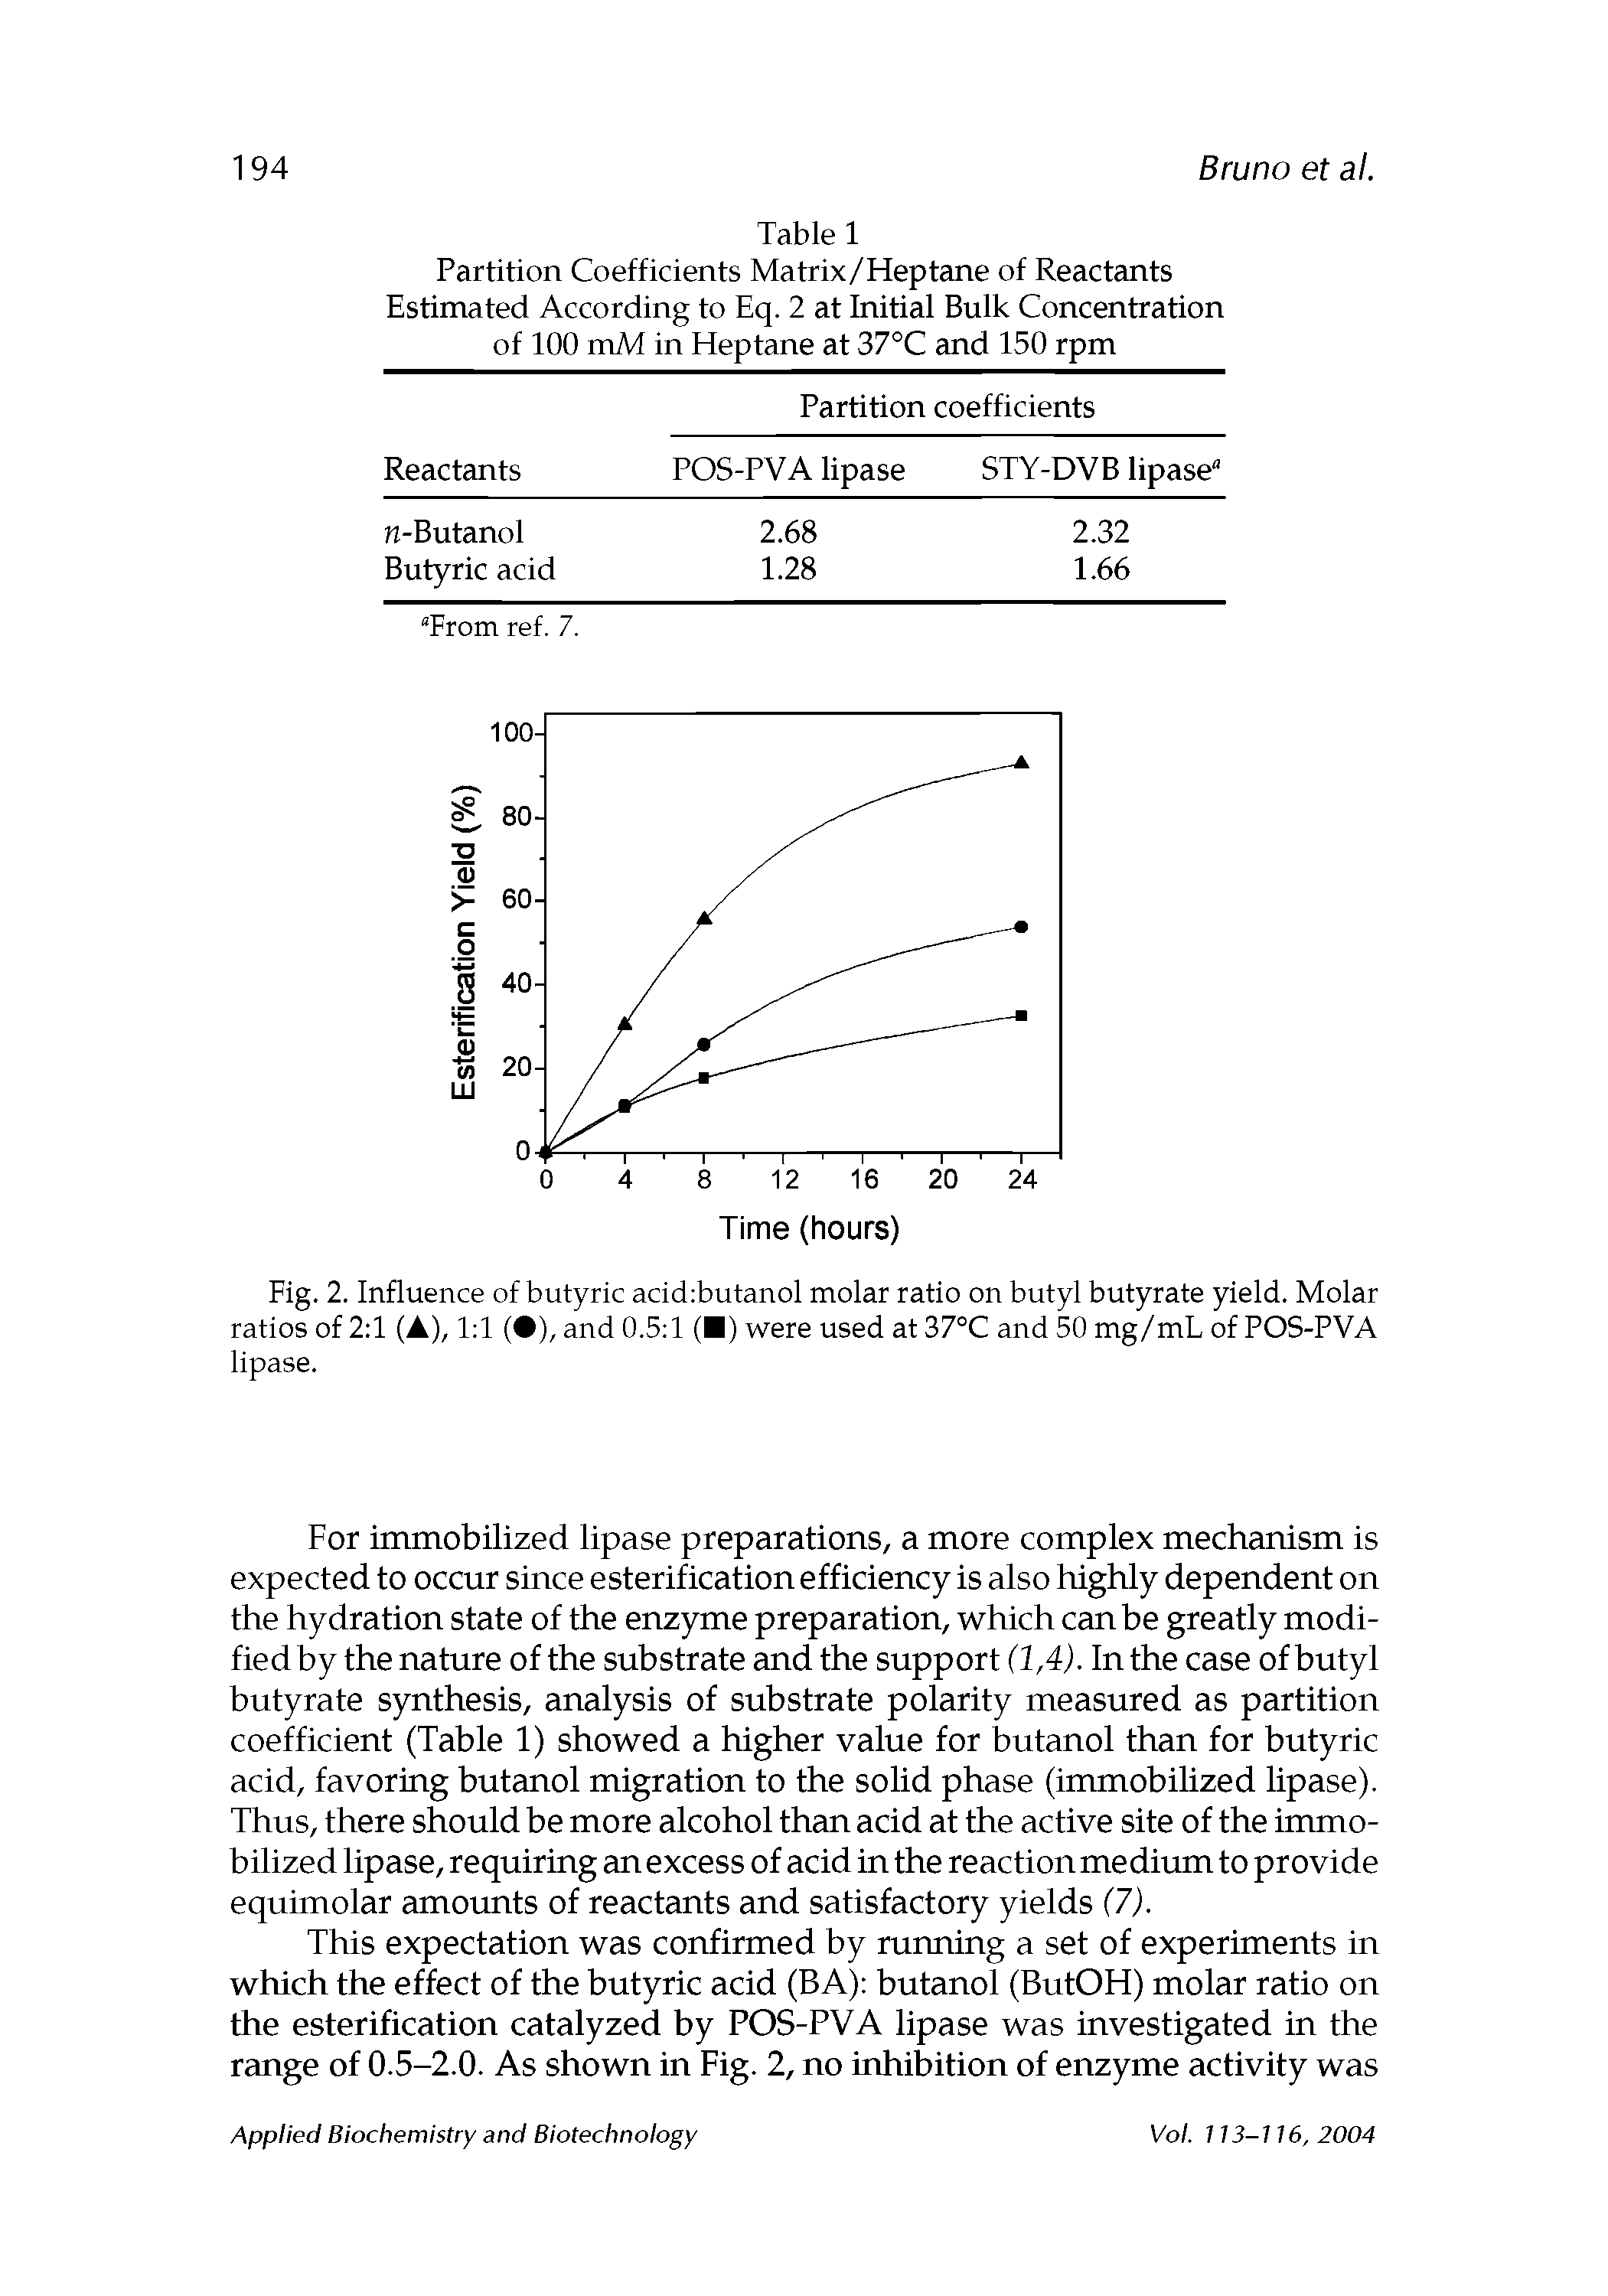 Fig. 2. Influence of butyric acichbutanol molar ratio on butyl butyrate yield. Molar ratios of 2 1 (A), 1 1 ( ), and 0.5 1 ( ) were used at 37°C and 50 mg/mL of POS-PVA lipase.